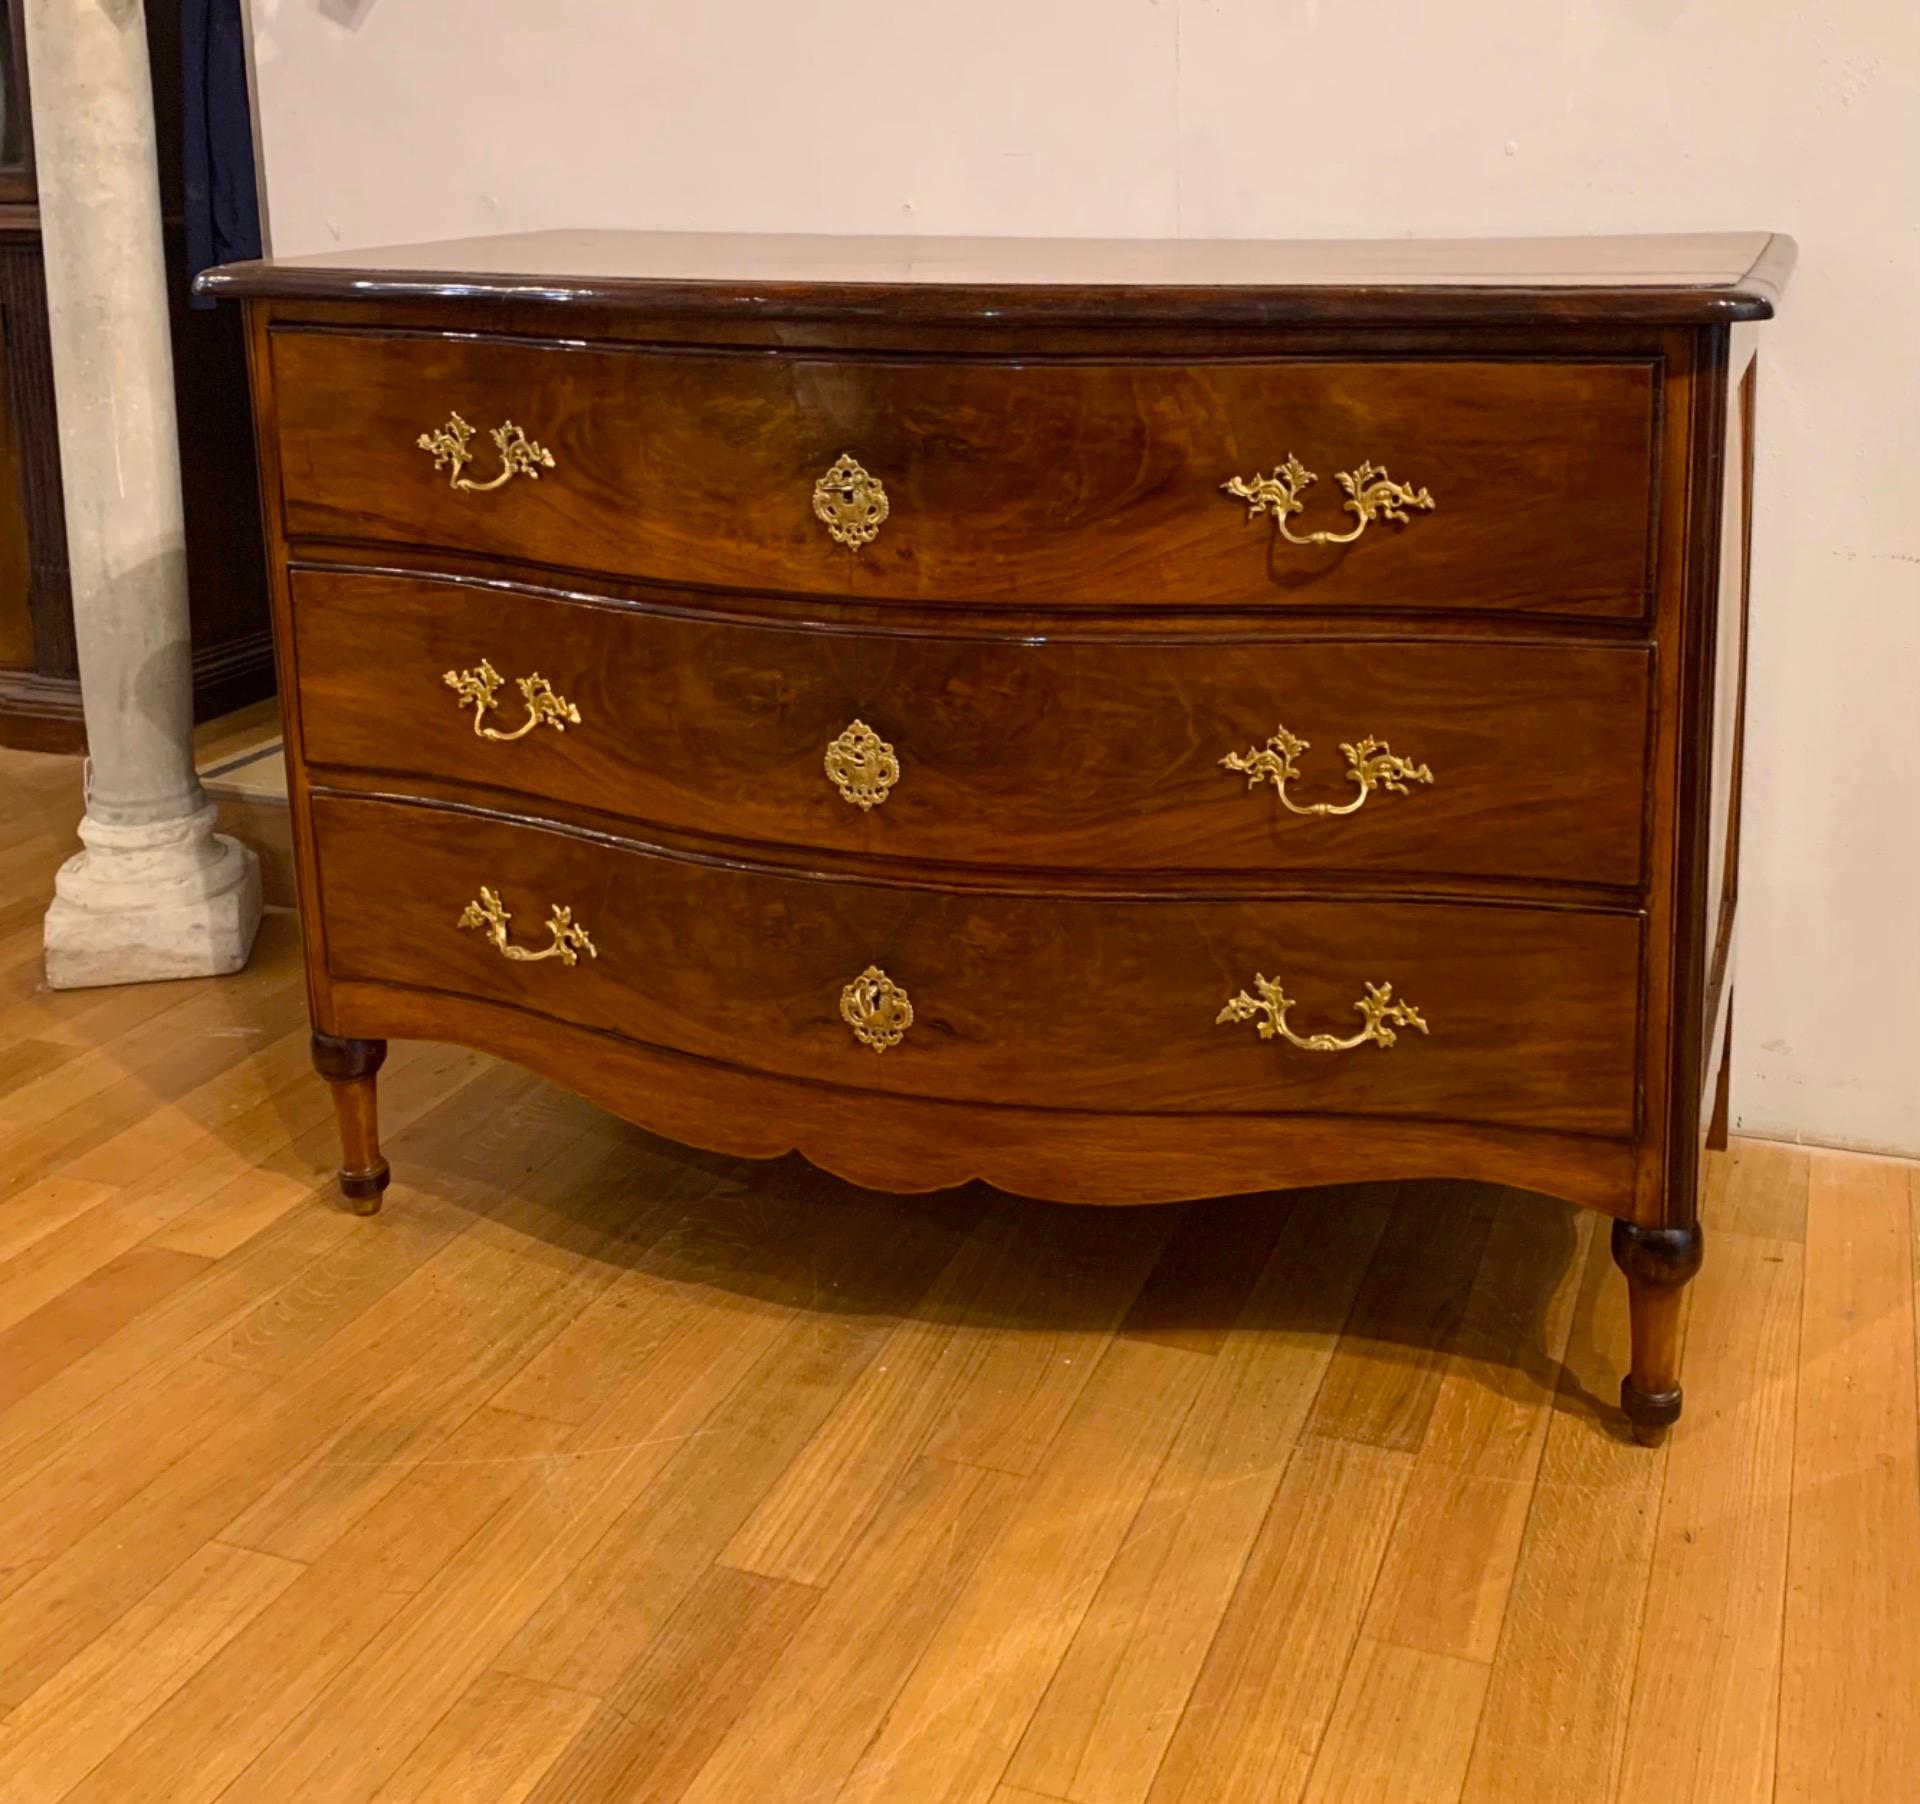 Elegant chest of drawers in solid walnut, characterized by exceptional workmanship of the materials. The walnut veneer parts add a touch of elegance to the overall design and make it a high-quality piece of furniture. The wavy front and veneered